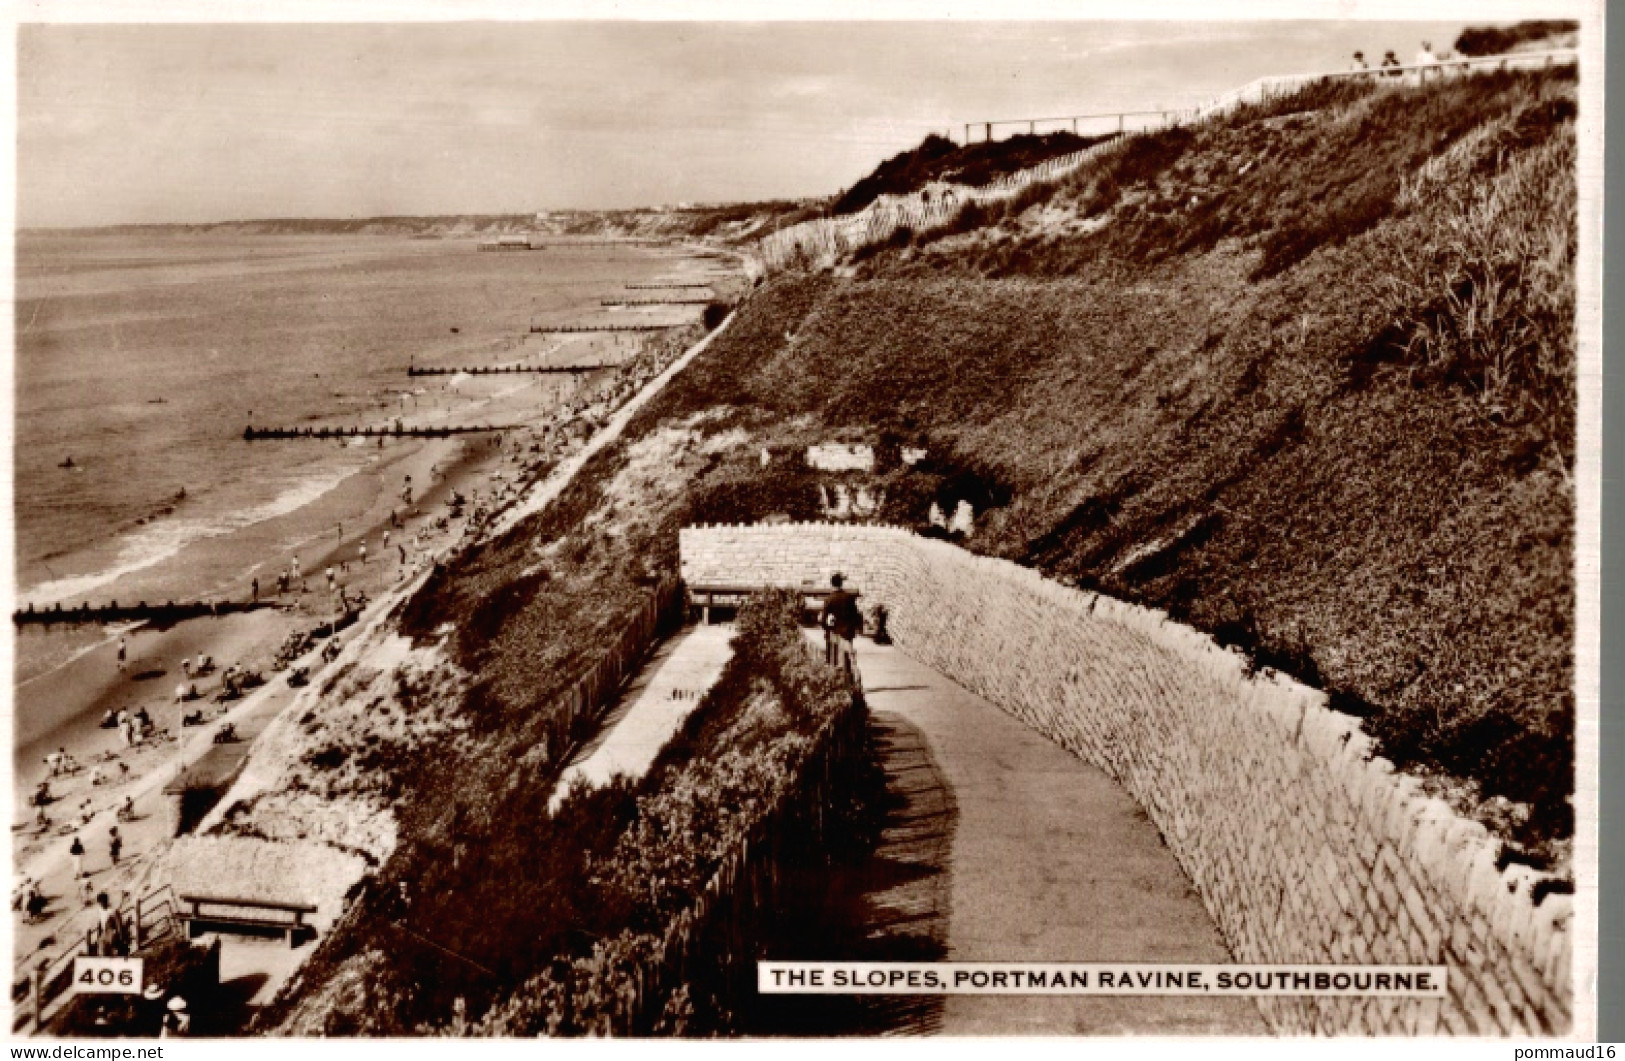 CPSM The Slopes, Portman Ravine Southbourne - Bournemouth (desde 1972)